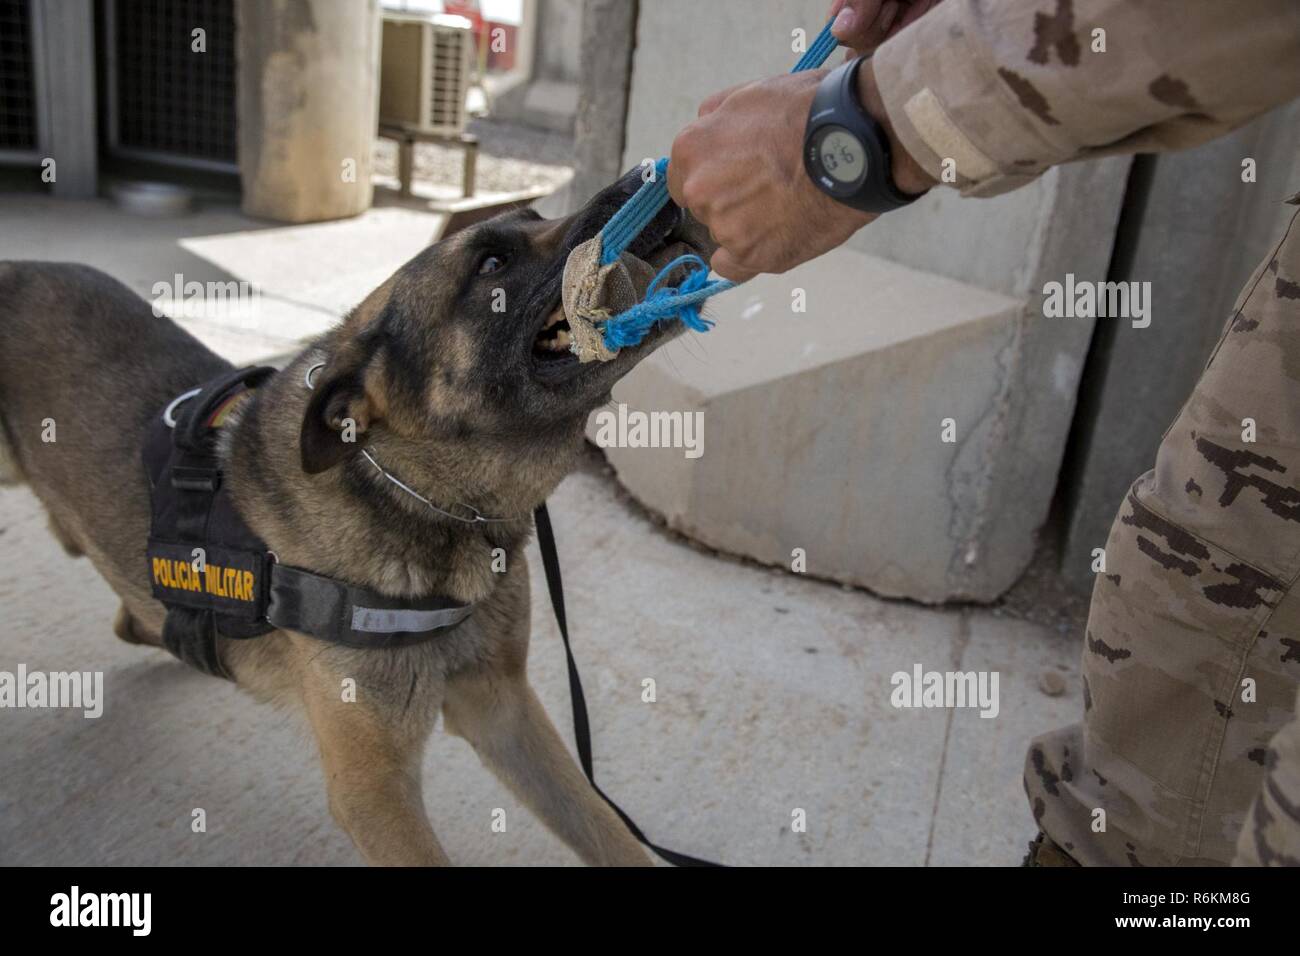 Hende selv budget ru Spanish army 1st. Cpl. Gabor, a military working dog deployed in support of  Combined Joint Task Force – Operation Inherent Resolve, plays with his  handler during a break at the Besmaya Range